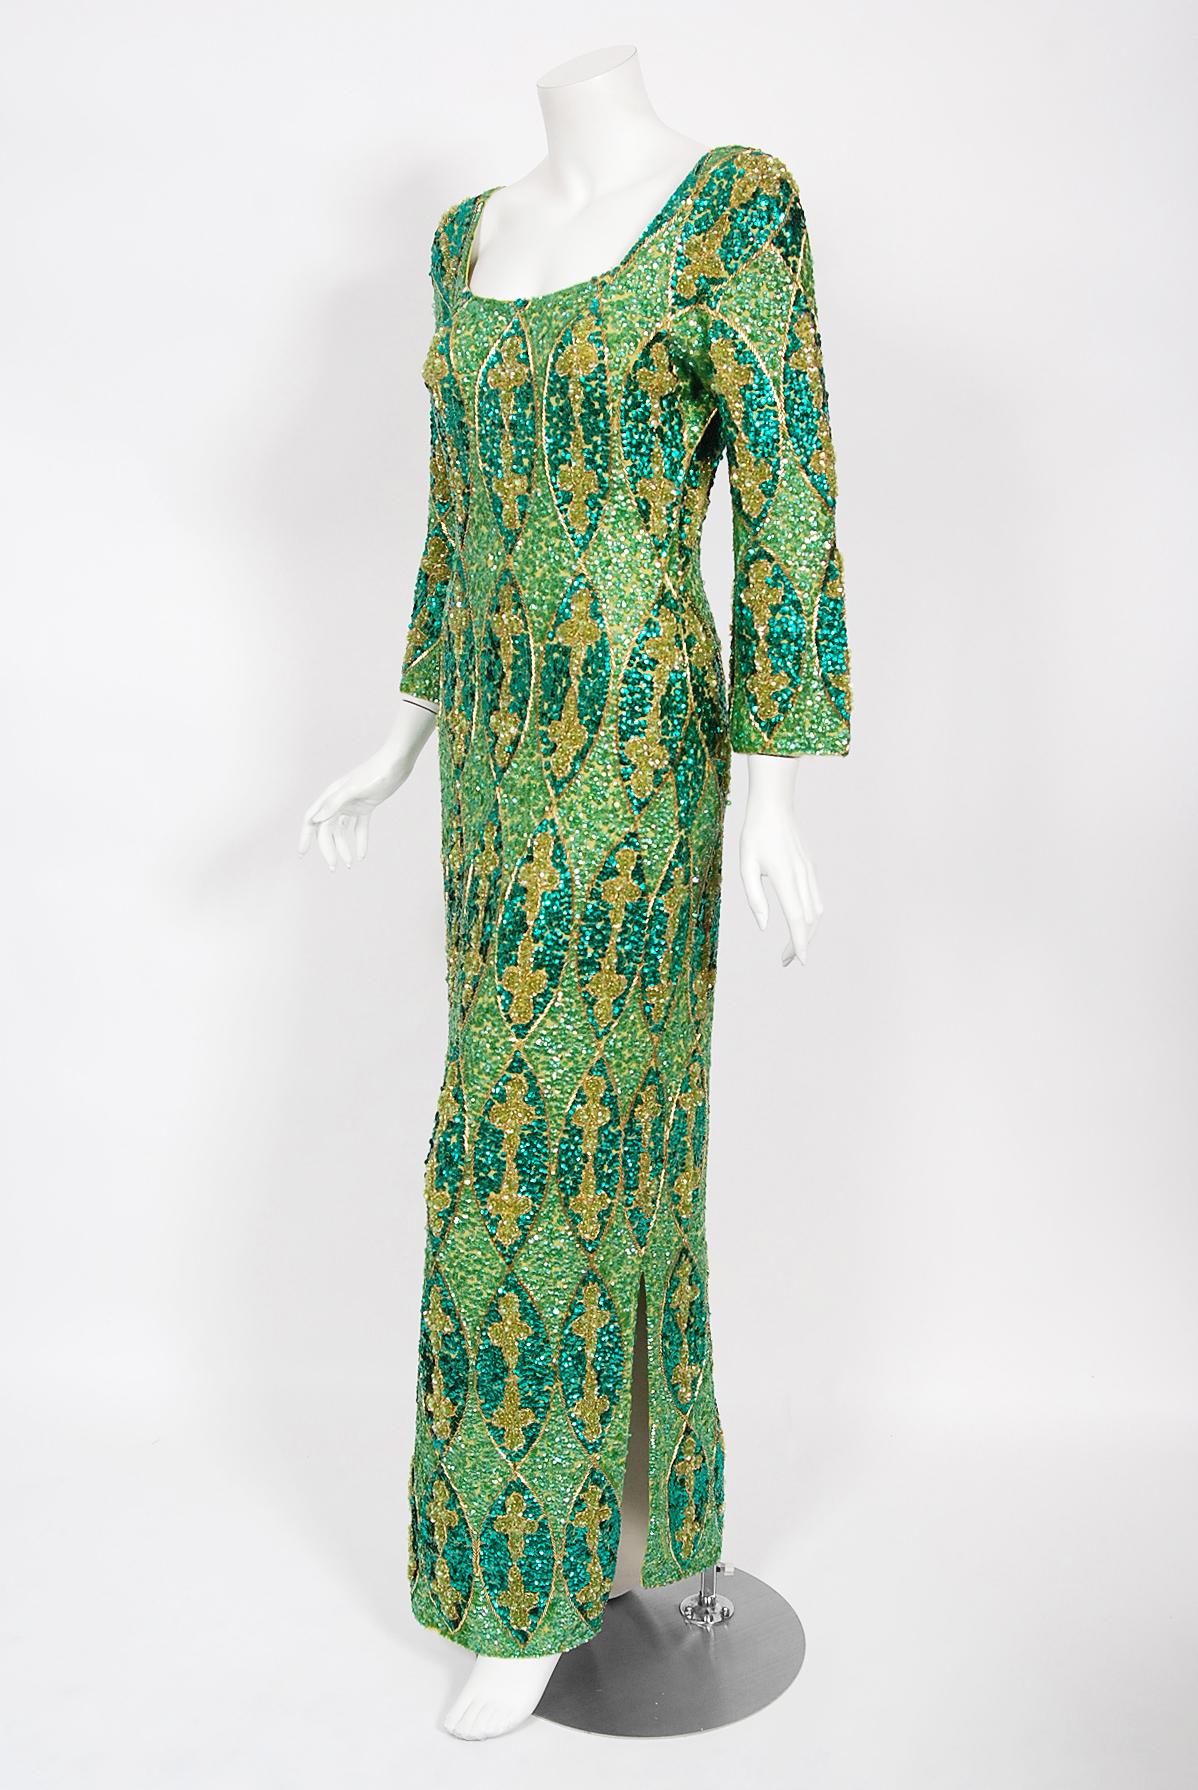 Women's Vintage 1960's Beaded Sequin Green Graphic Stretch-Knit Hourglass Evening Gown